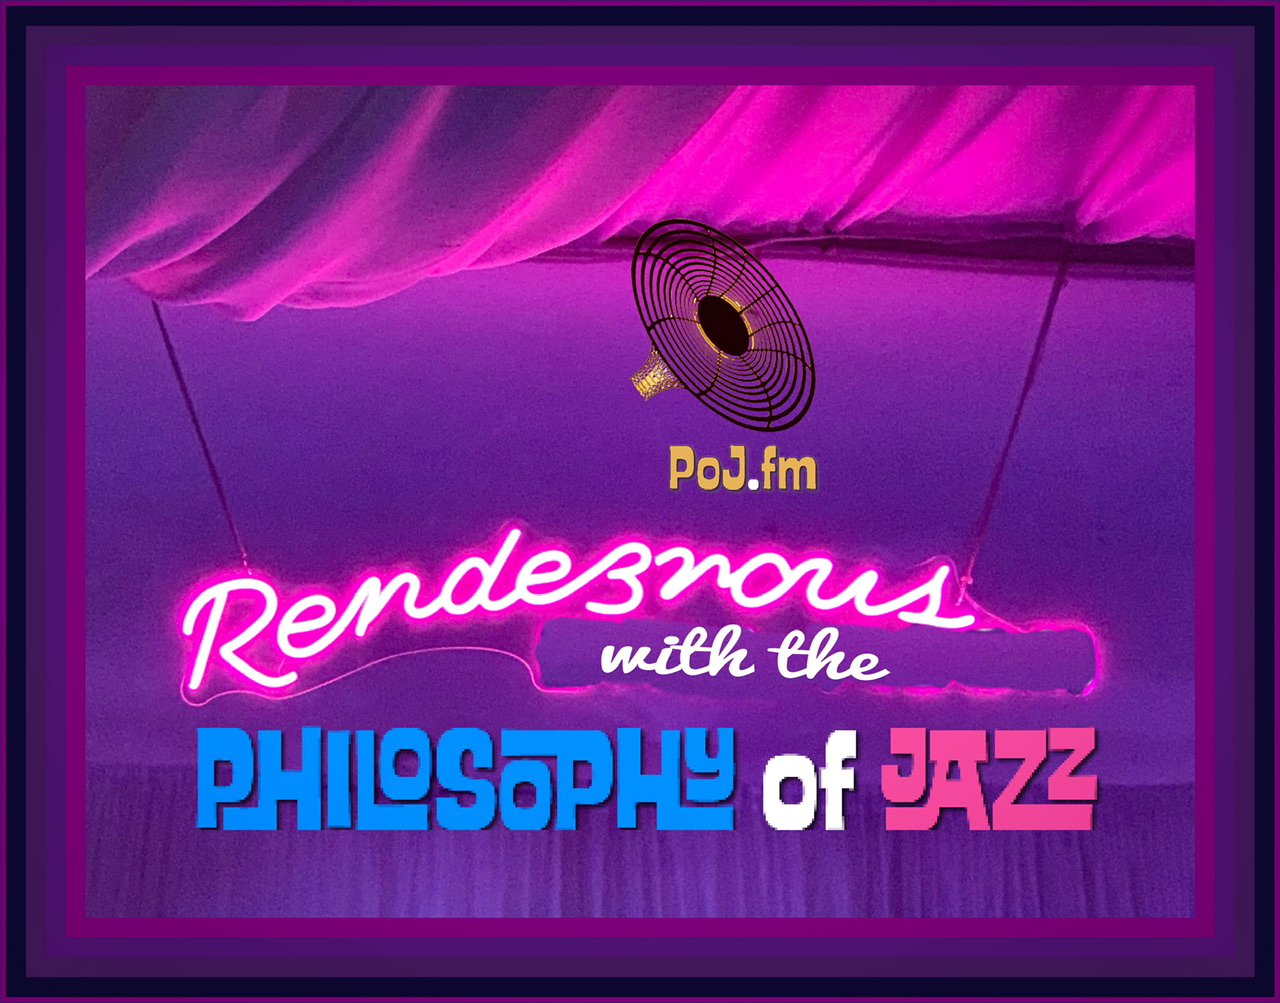 A framed picture of the word "Rendezvous" in bright purple neon written in script with the words "with the Philosophy of Jazz" written below and a PoJ.fm logo top center on a bright purple background.